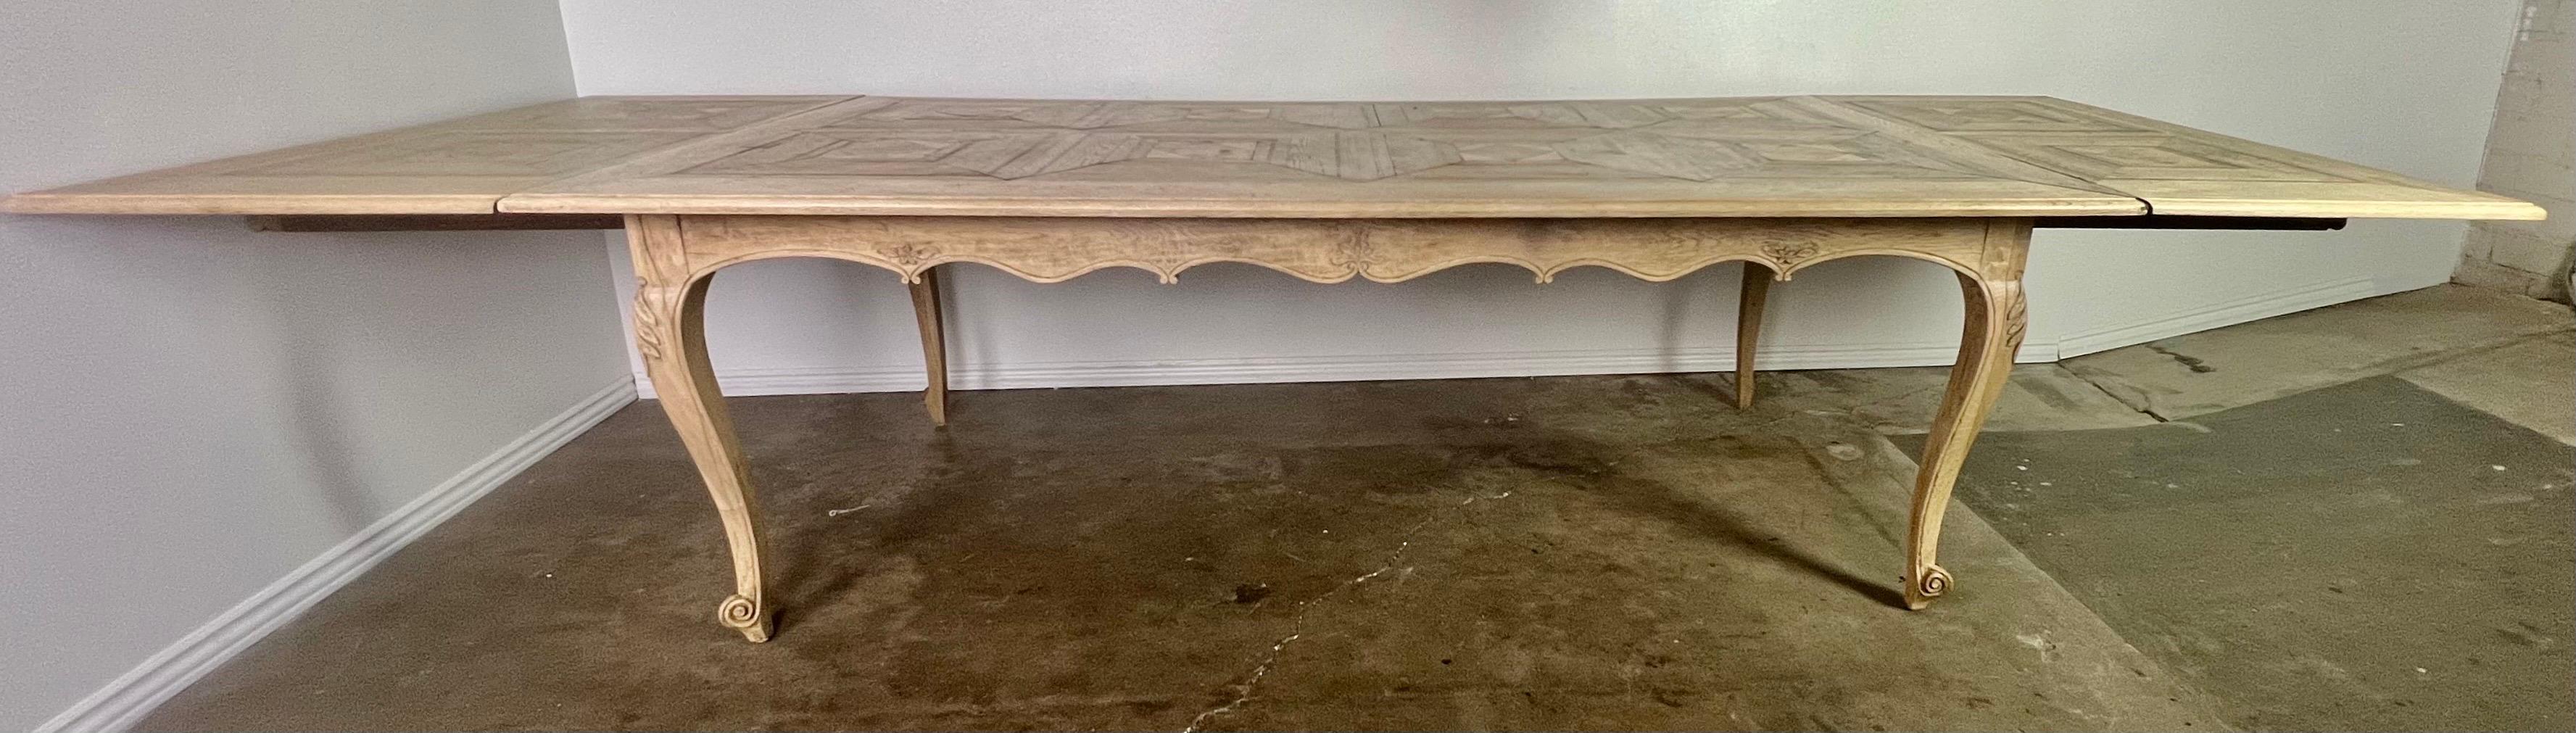 19th Century French Parquetry Dining Table In Distressed Condition For Sale In Los Angeles, CA